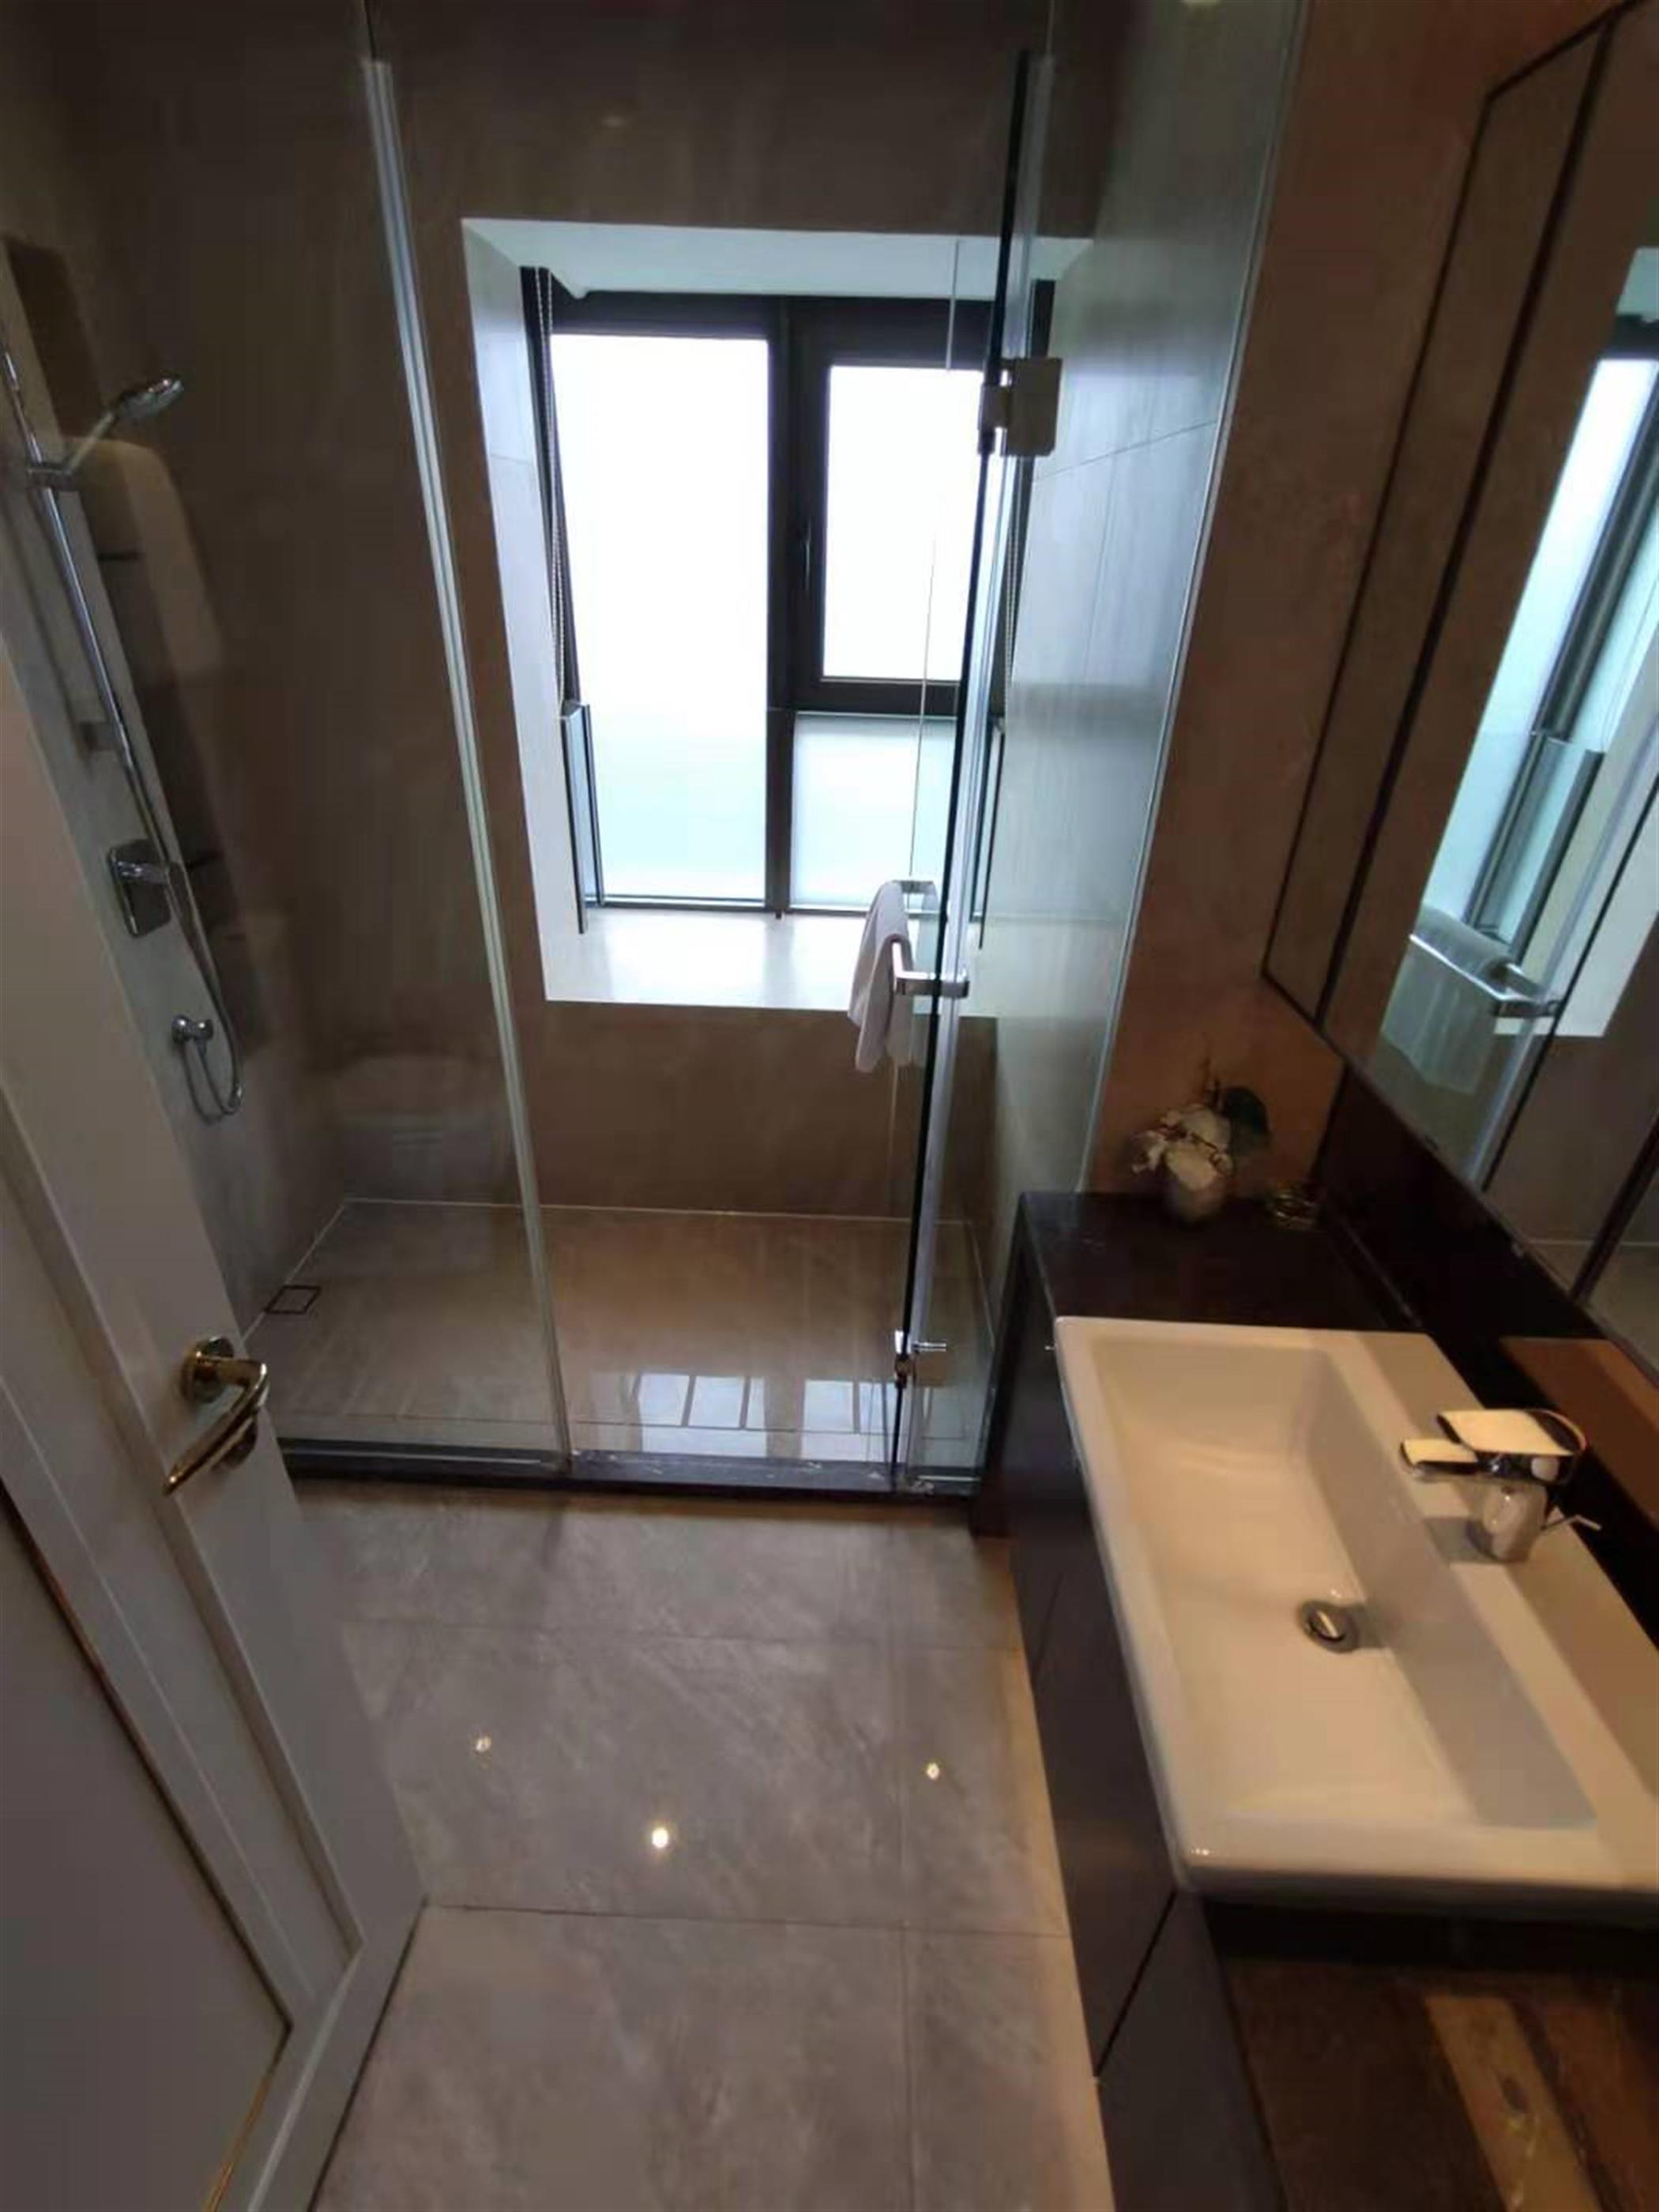 Master Bathroom Luxurious FFC 3BR+Office Service Apartment nr LN 1/9/10/12 for Rent in Shanghai